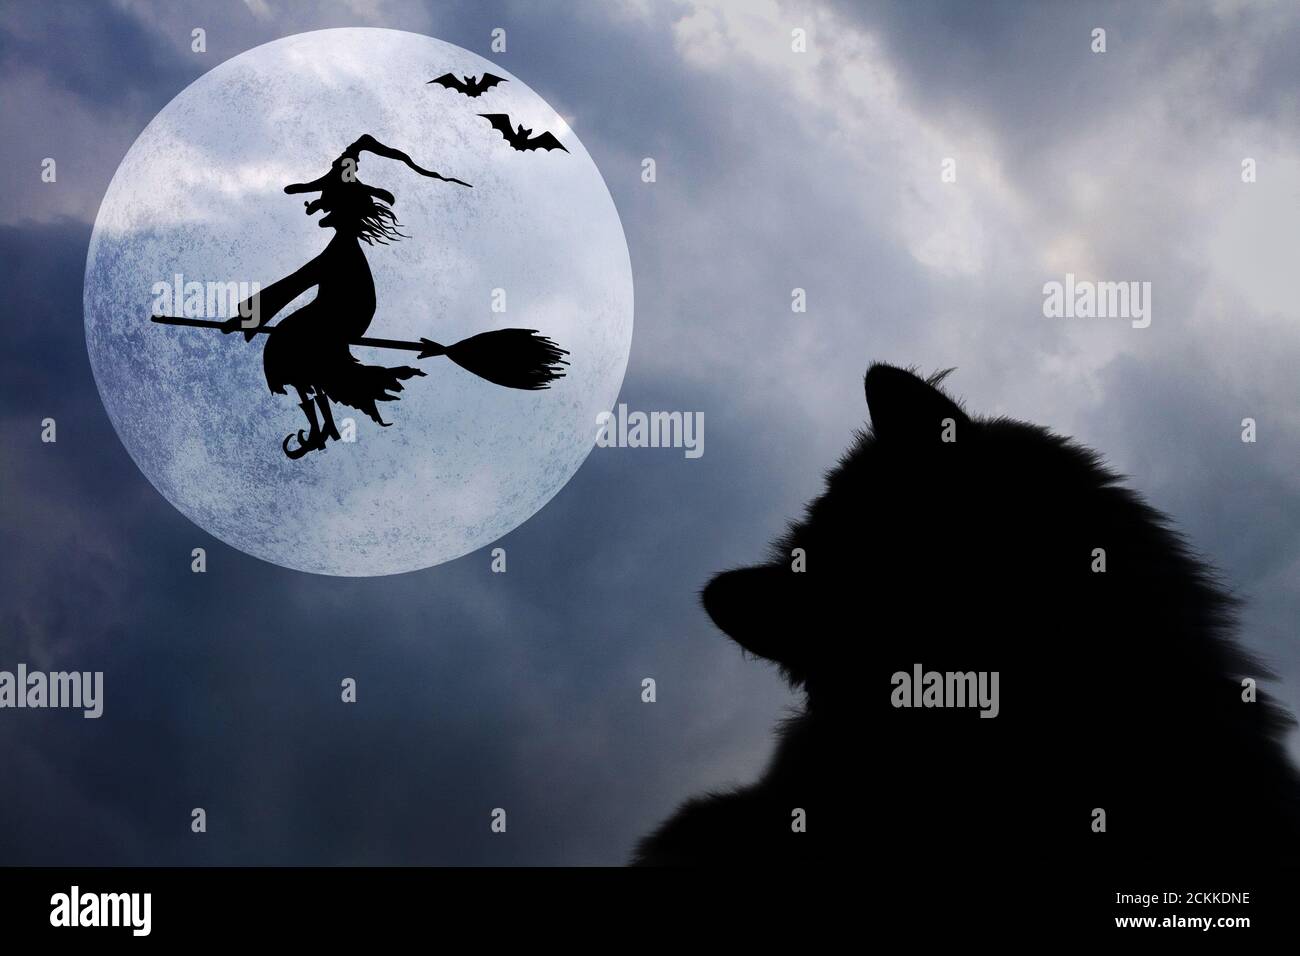 Halloween horizontal background with silhouettes of black cat, bats, full moon and smiling wicked witch flying on broomstick with hat with a wart on t Stock Photo